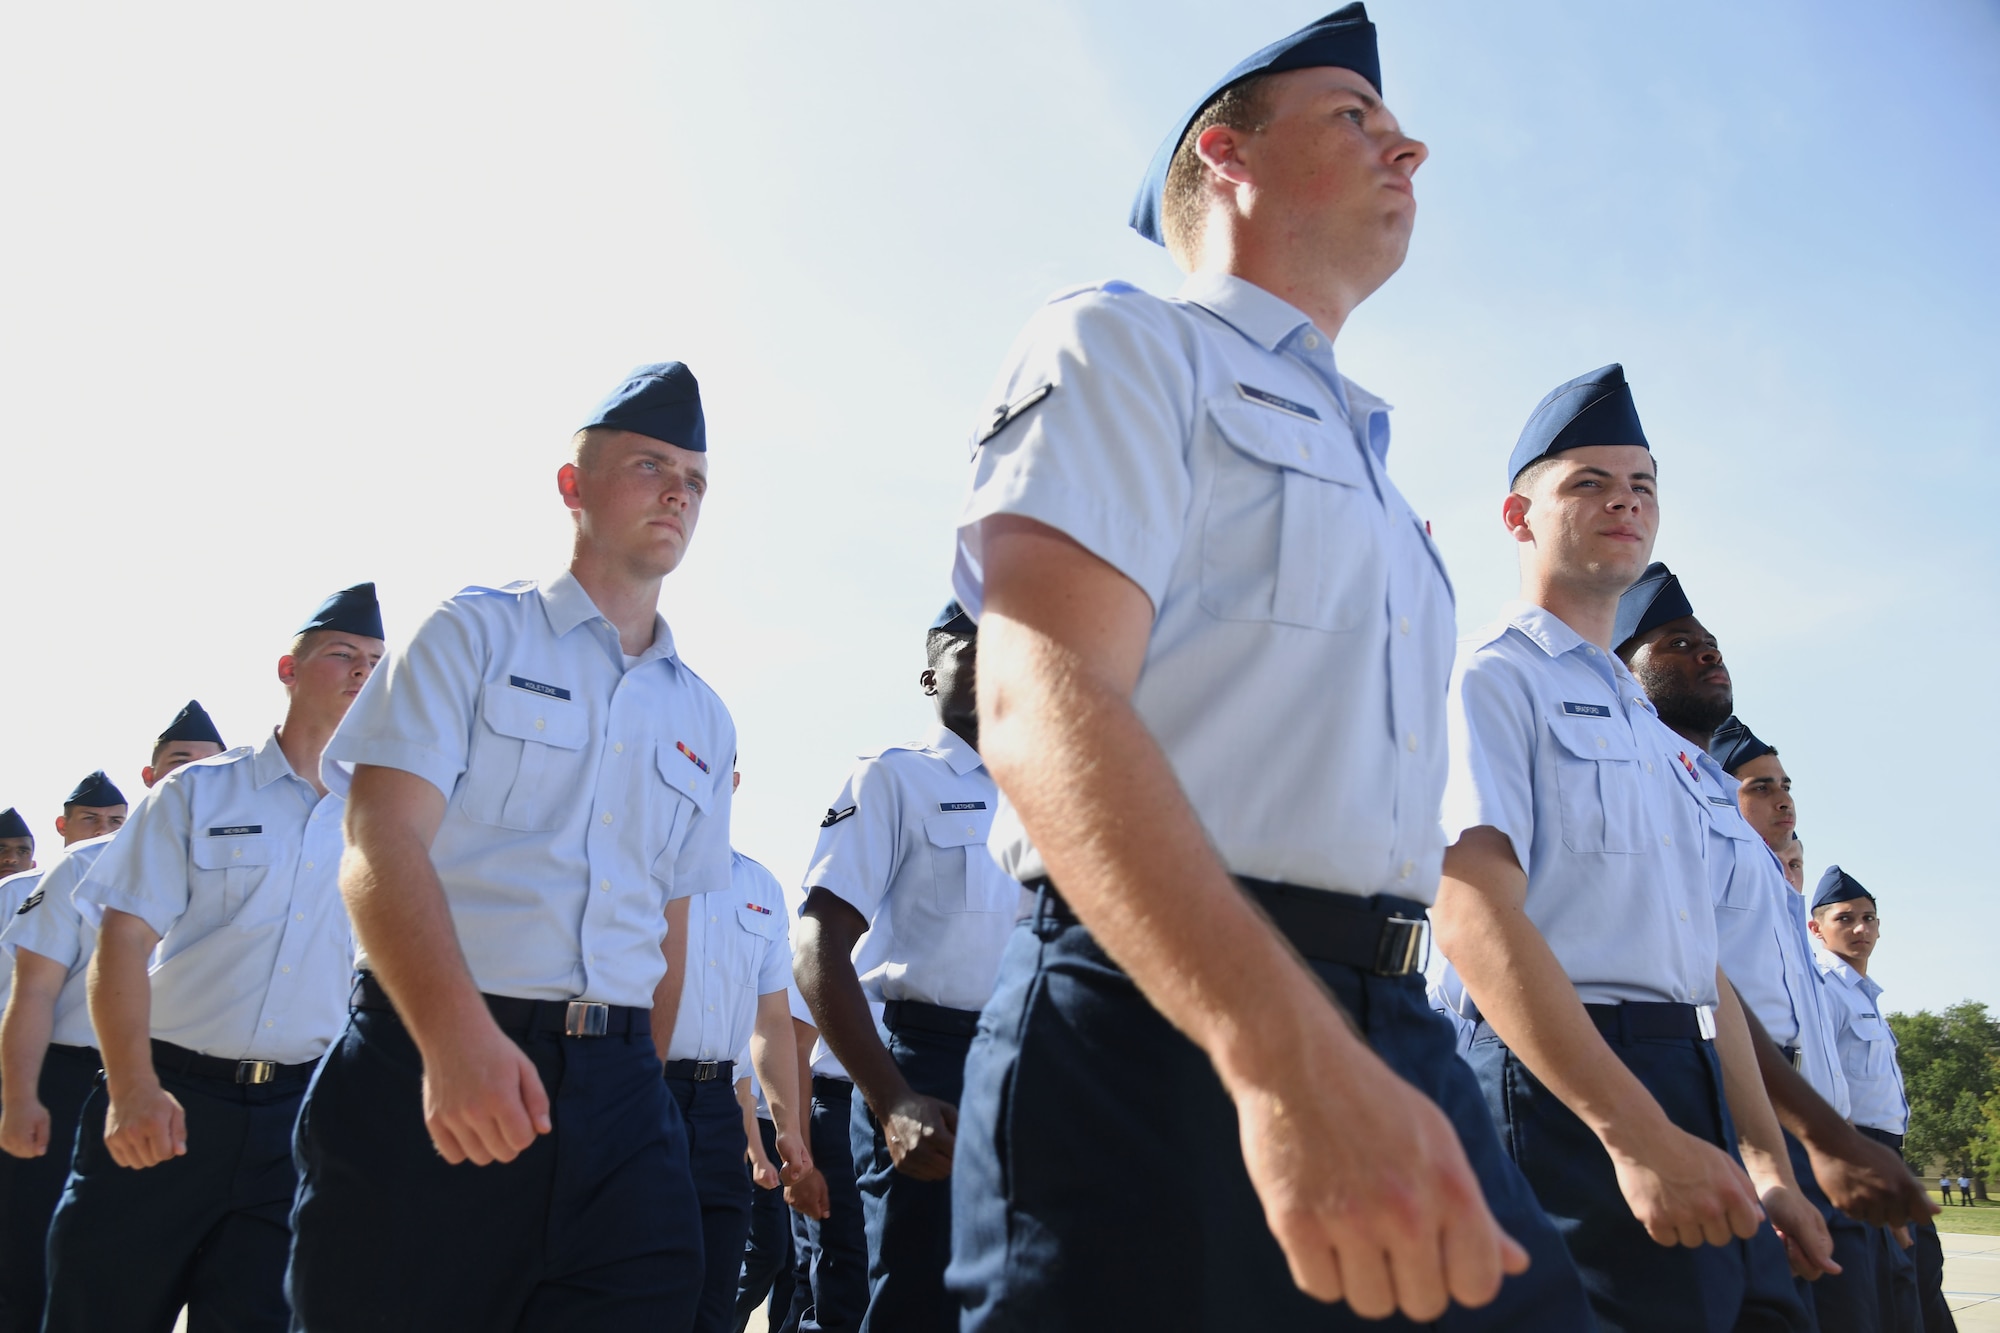 Airmen from the 81st Training Group march in formation during the 81st TRG Change of Command Ceremony on the Levitow Training Support Facility drill pad at Keesler Air Force Base, Mississippi, June 15, 2022. U.S. Air Force Col. Laura King, incoming 81st Training Group commander, assumed command from Col. Chance Geray, outgoing 81st TRG commander. (U.S. Air Force photo by Kemberly Groue)